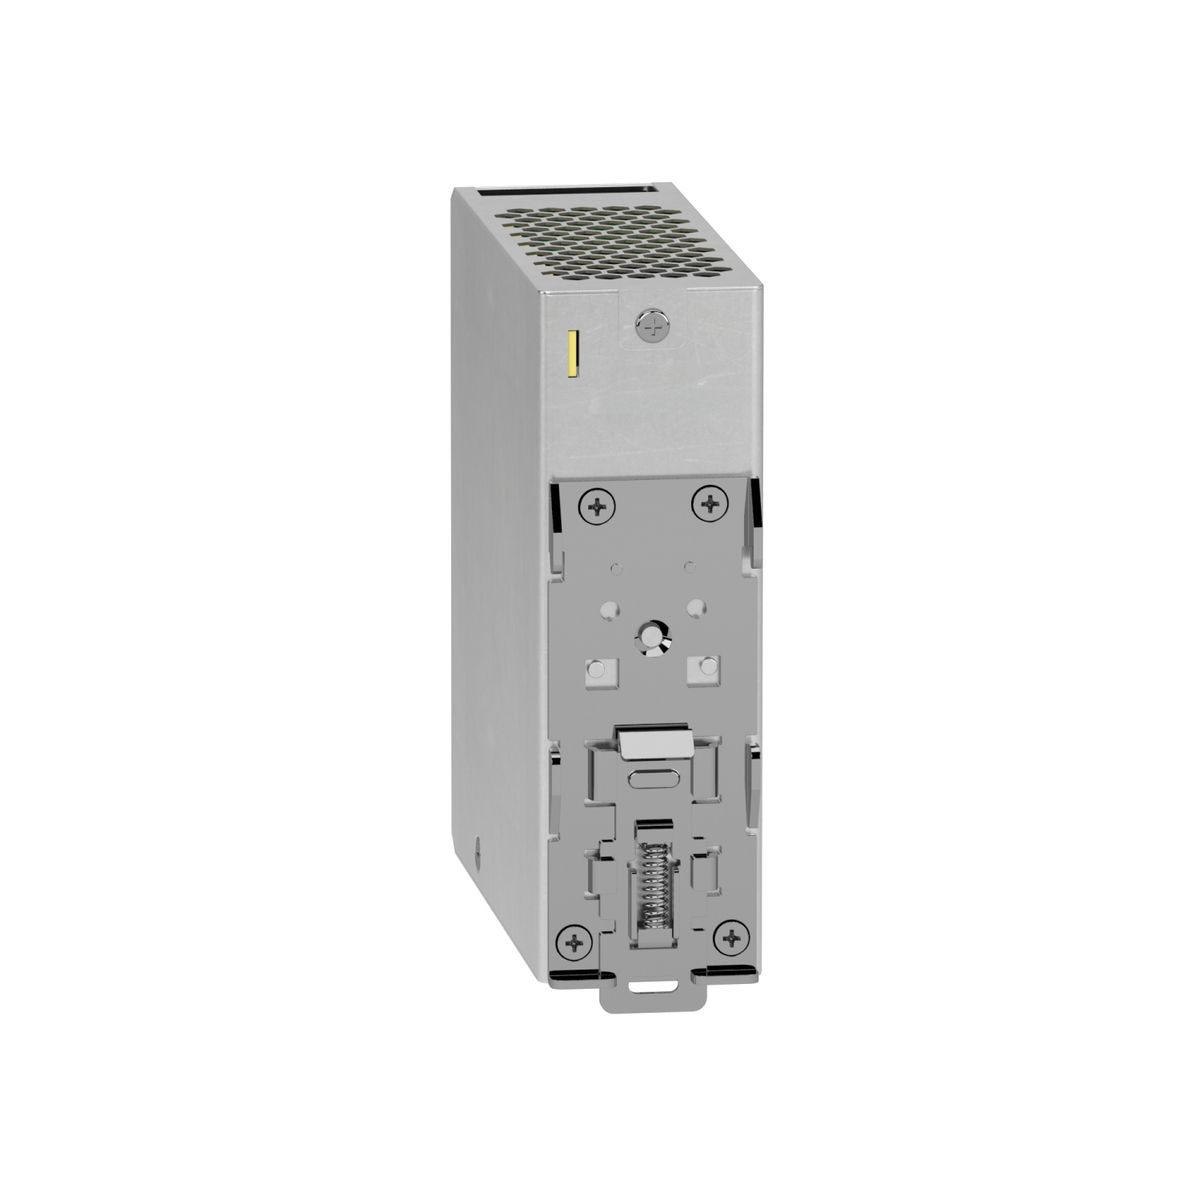 ABLS1A24050 - Modicon ABL - switching power supply - 5A - 100 to 240Vac single/two-phase - 24Vdc - Schneider Electric - 5